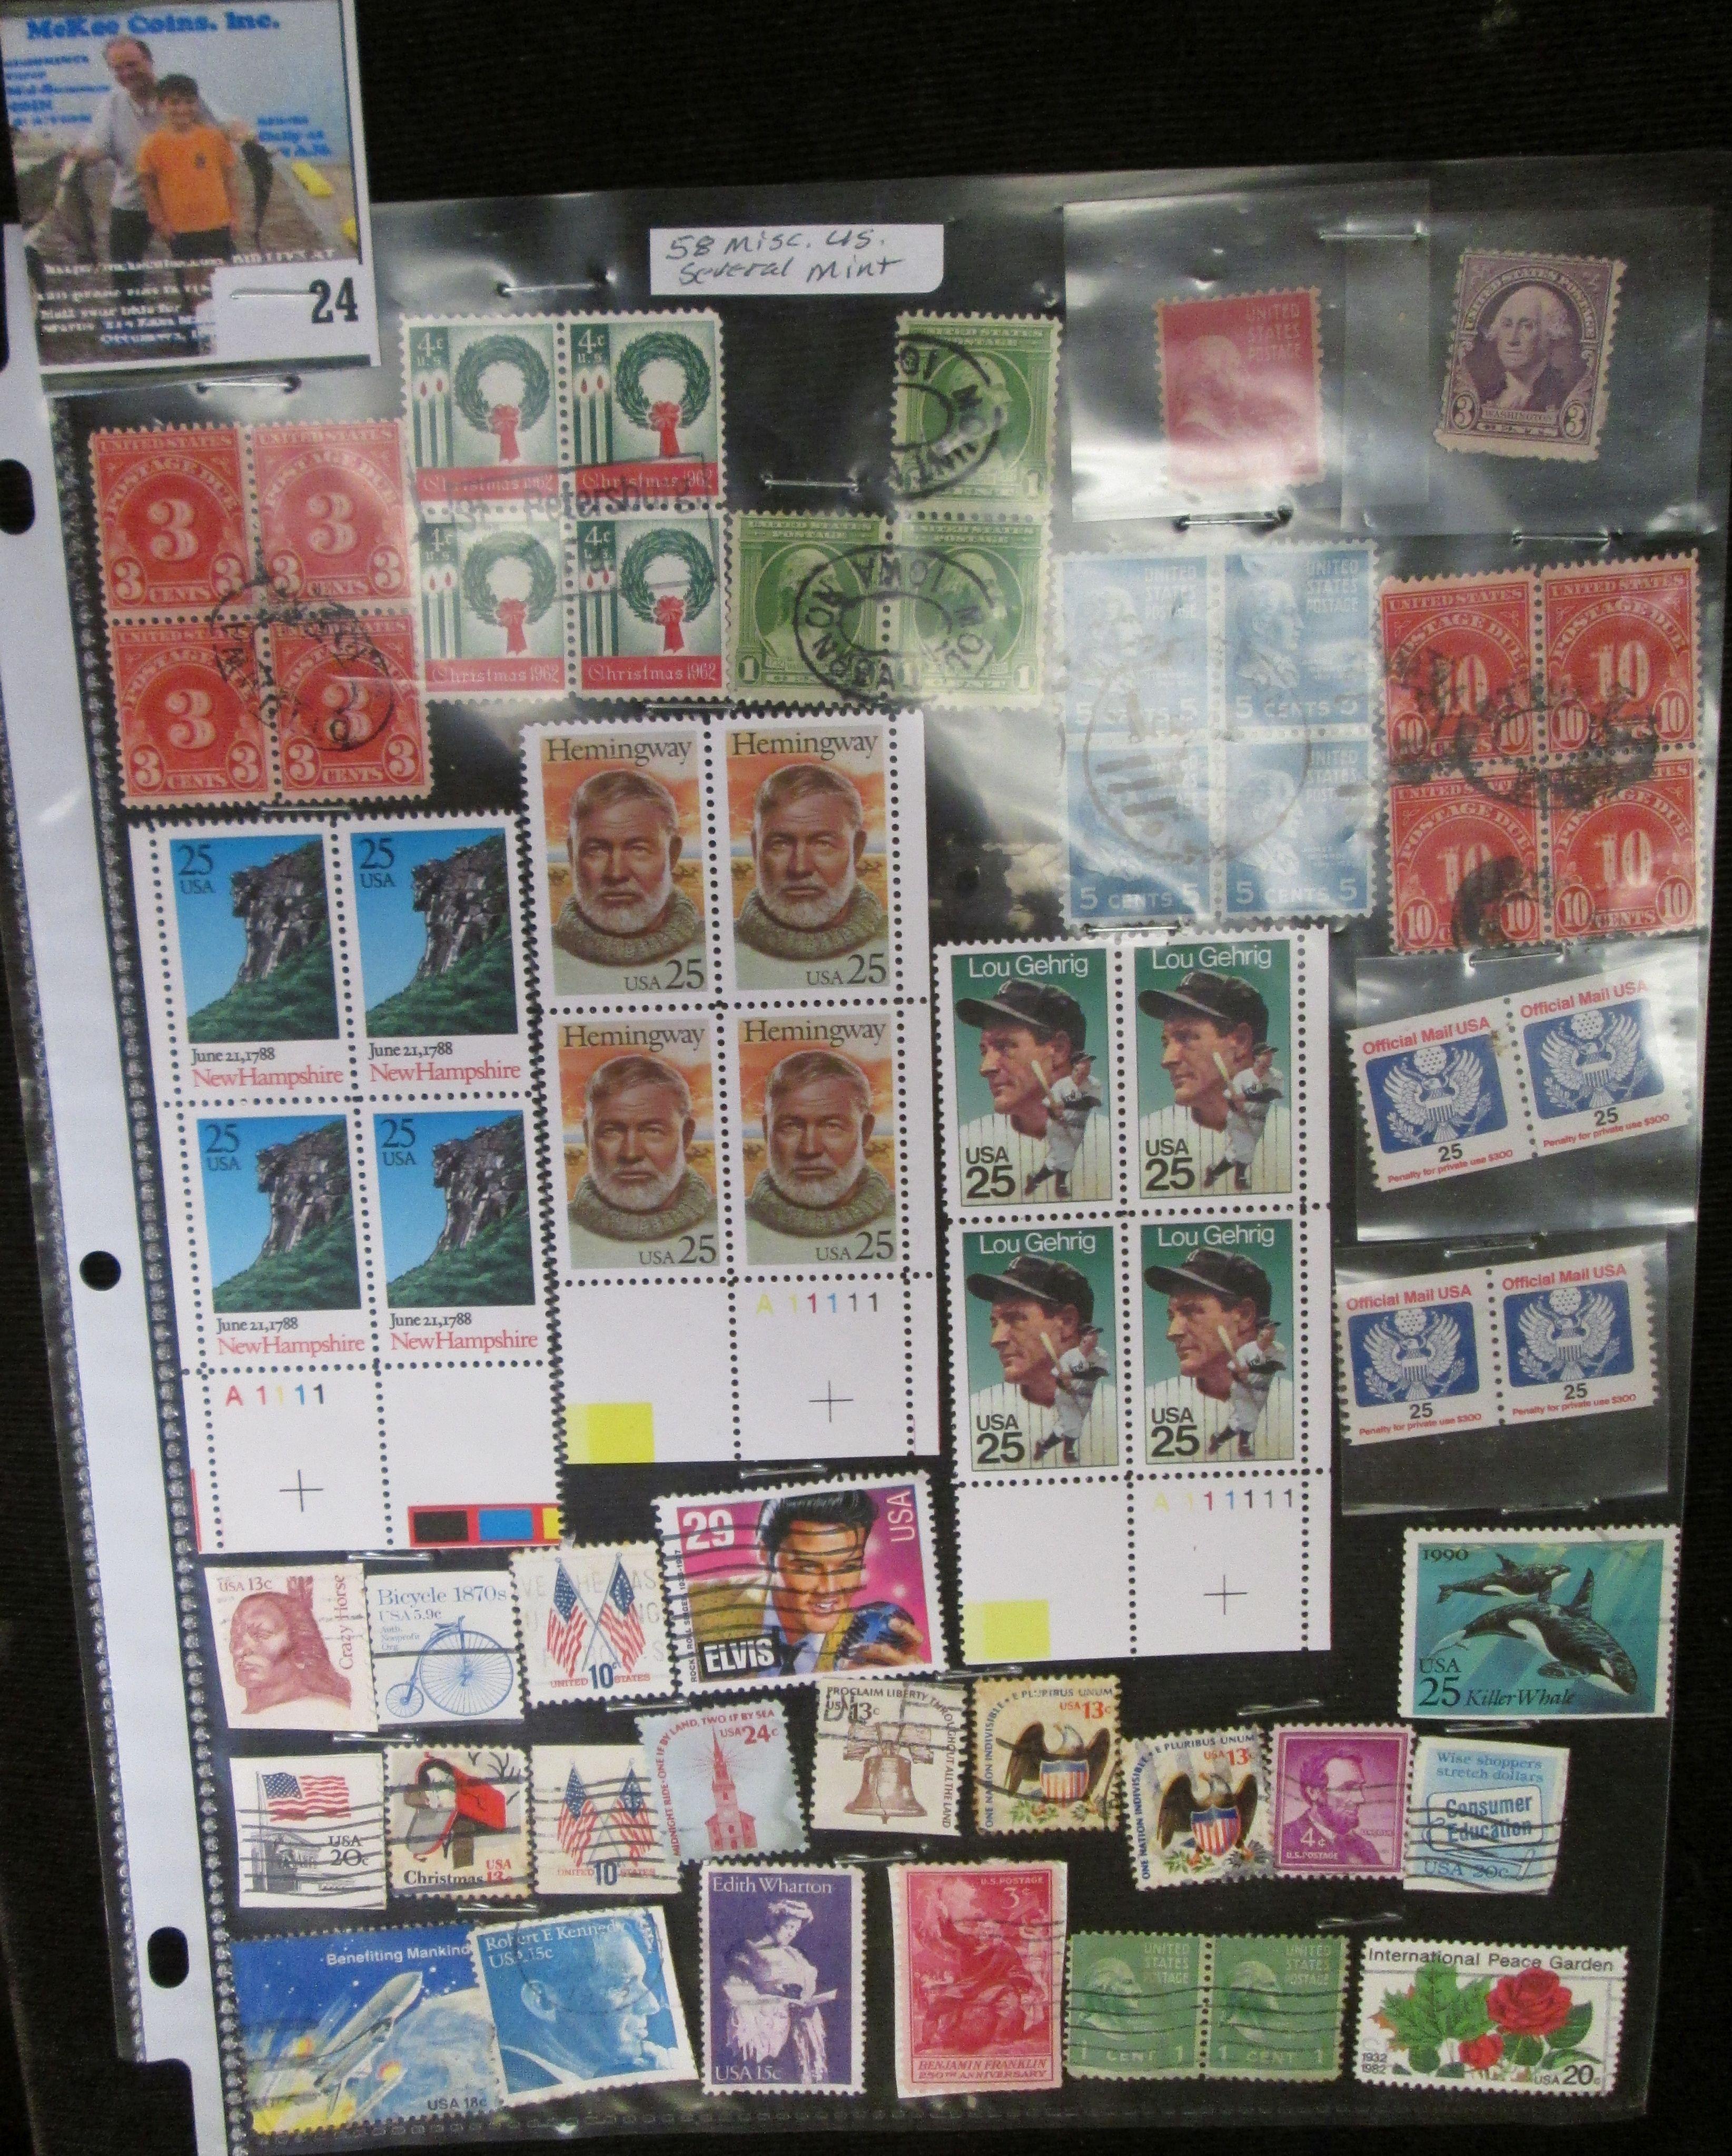 (58) Miscellaneous U.S. Stamps, several are Mint condition.